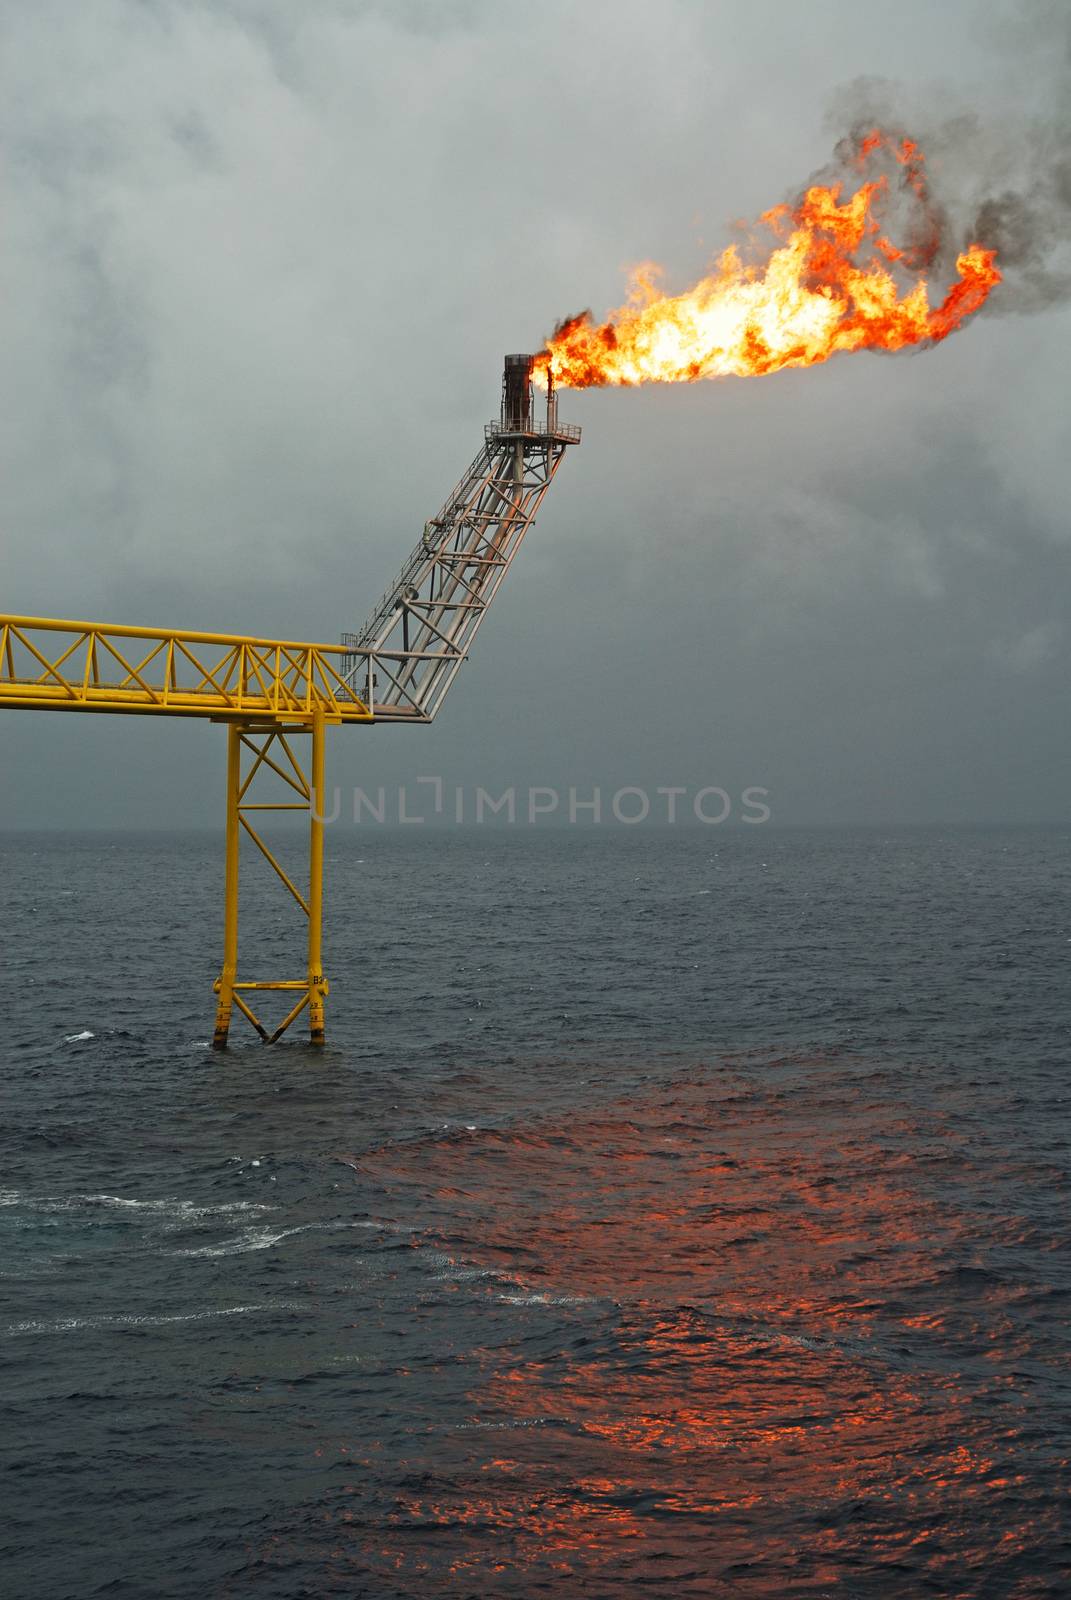 Flare boom nozzle and fire on offshore oil rig by think4photop